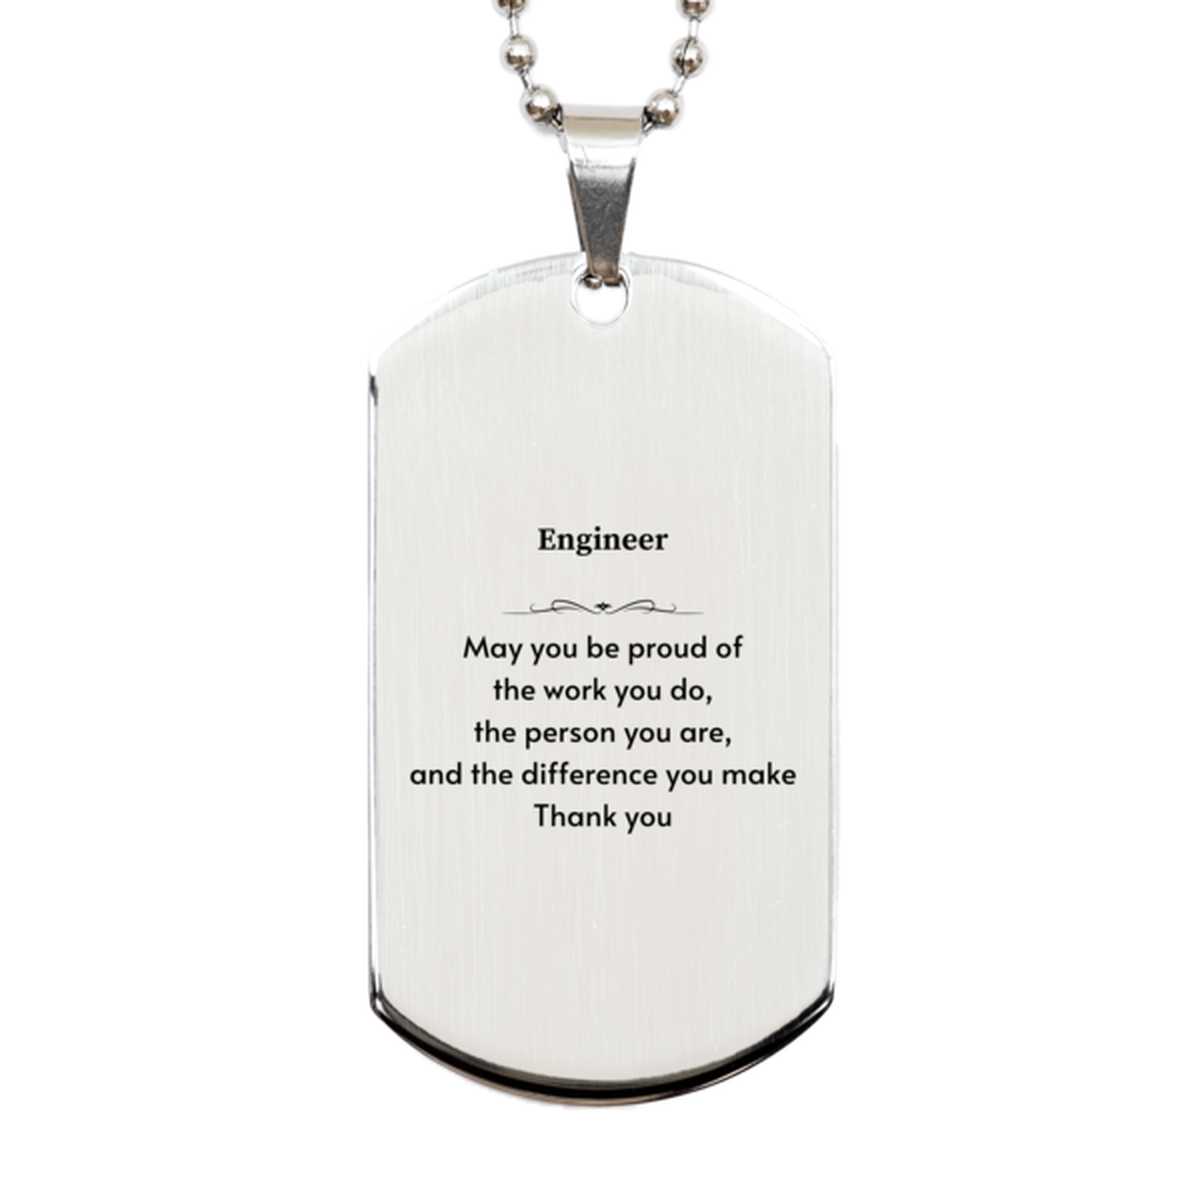 Heartwarming Silver Dog Tag Retirement Coworkers Gifts for Engineer, Engineer May You be proud of the work you do, the person you are Gifts for Boss Men Women Friends